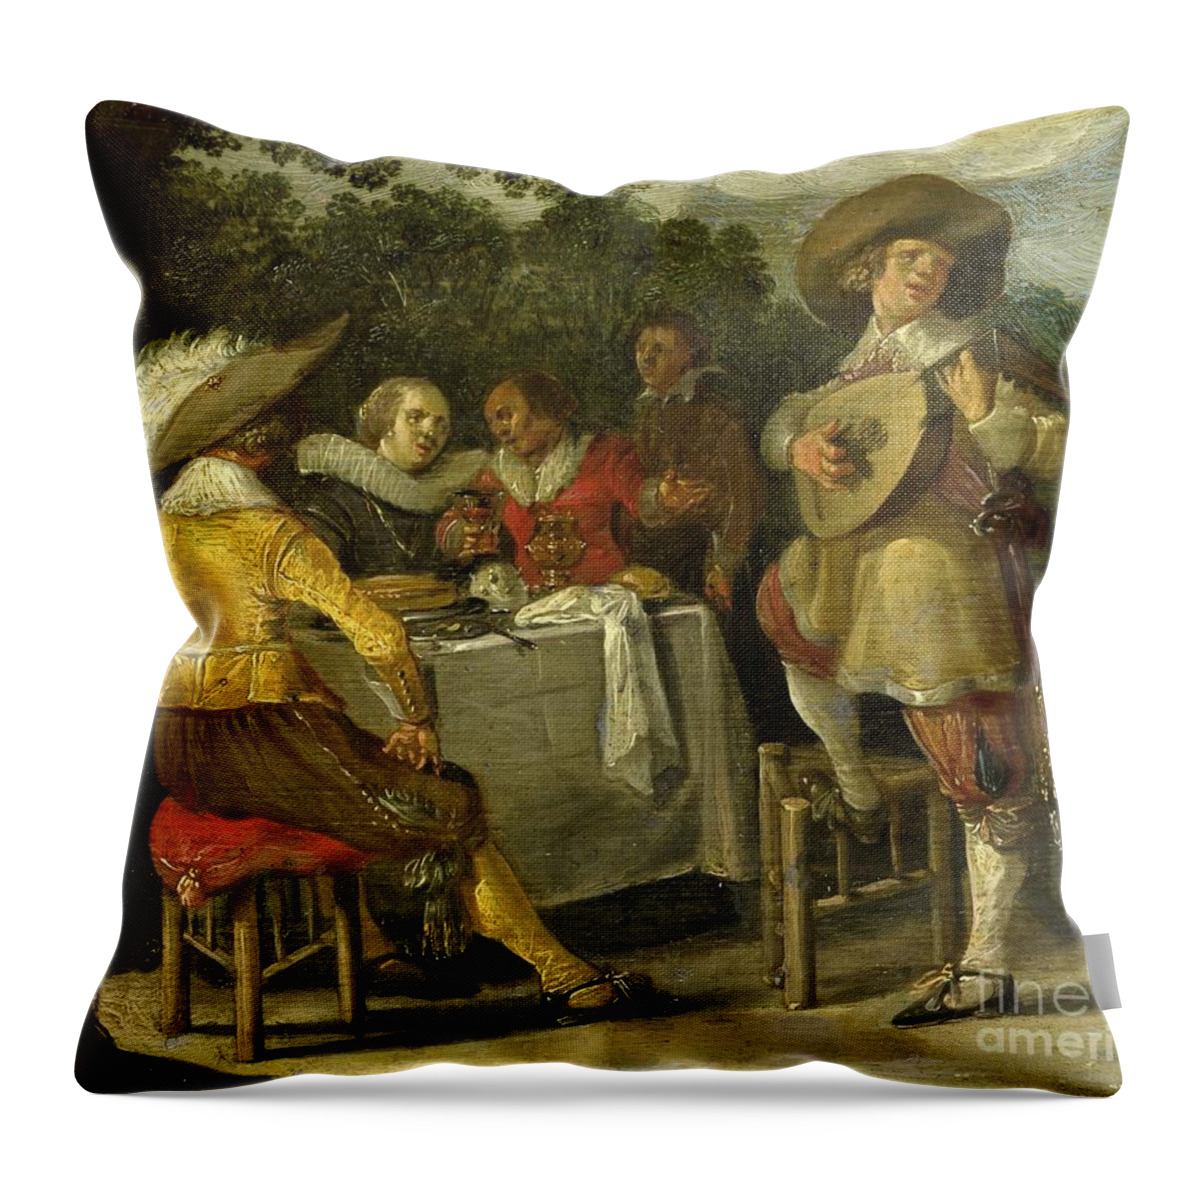 Drink Throw Pillow featuring the painting An Outdoor Party, C.1620-30 by Dirck Hals